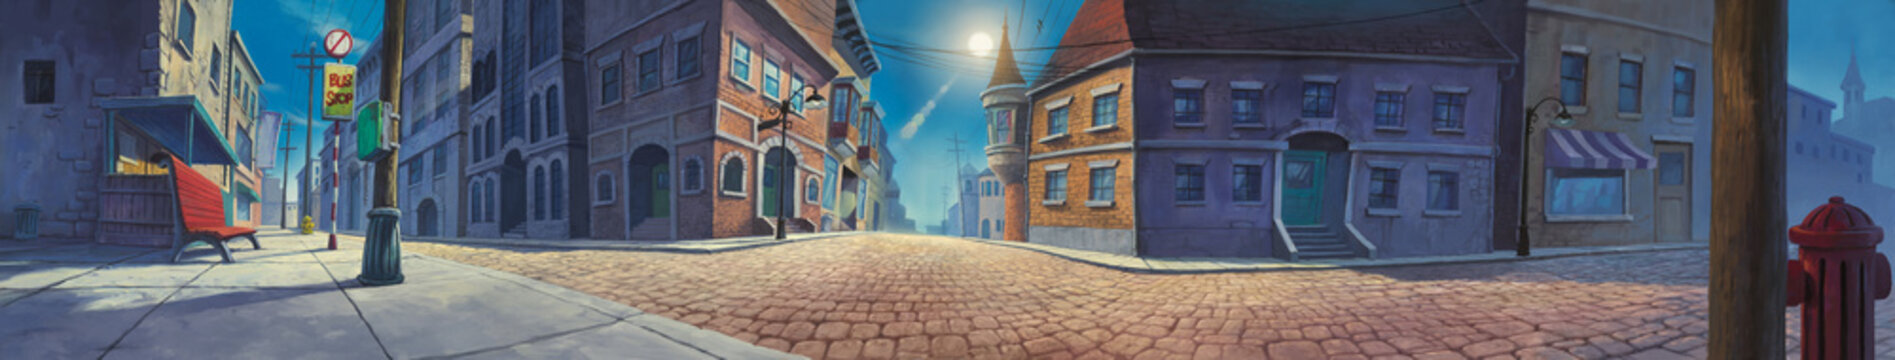 Old town panorama painted illustration